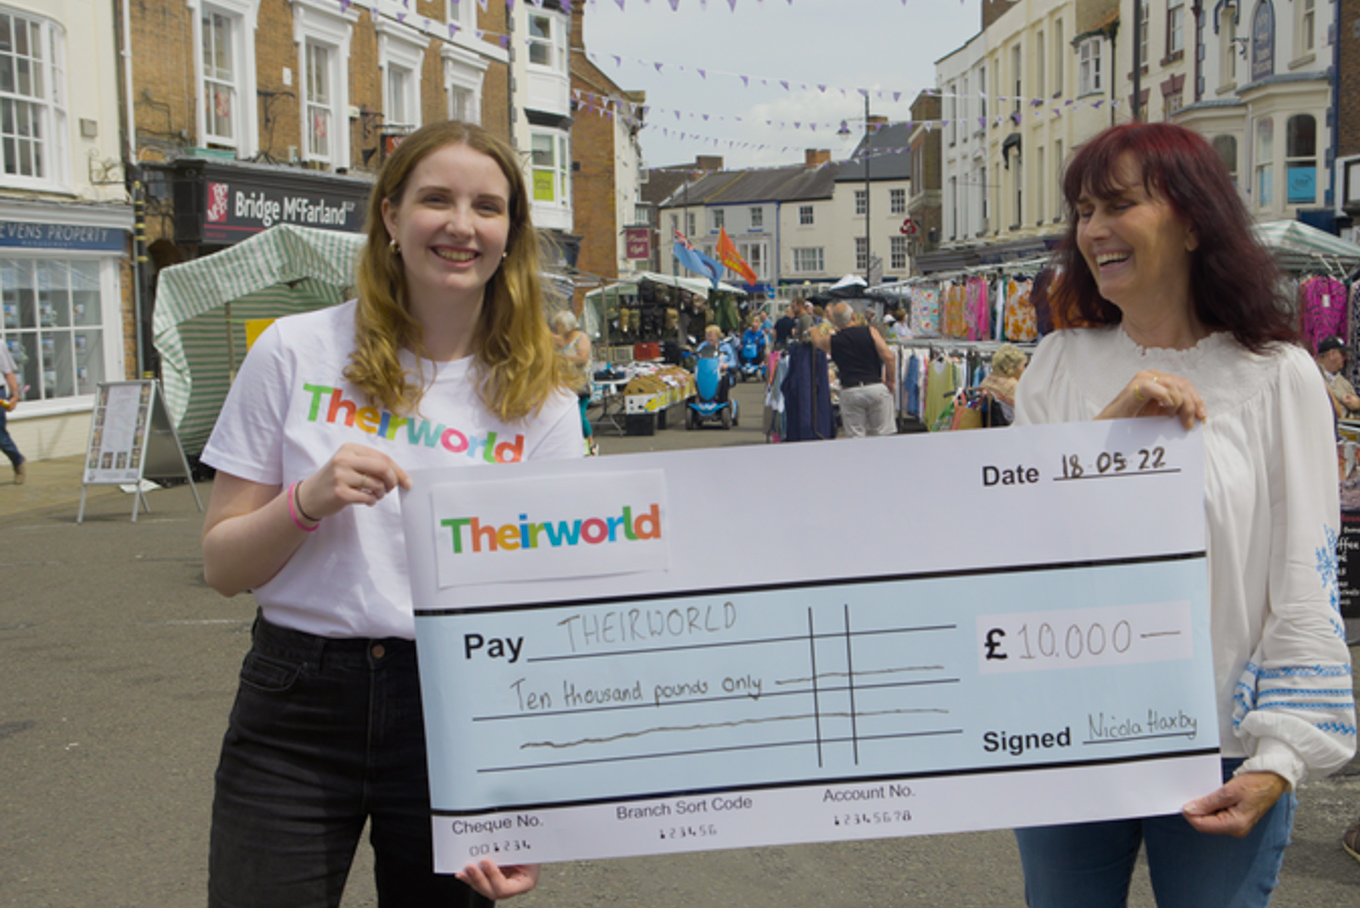 Emma Wace and Nicola Haxby holding a cheque of £10,000 fundraising for Theirworld.